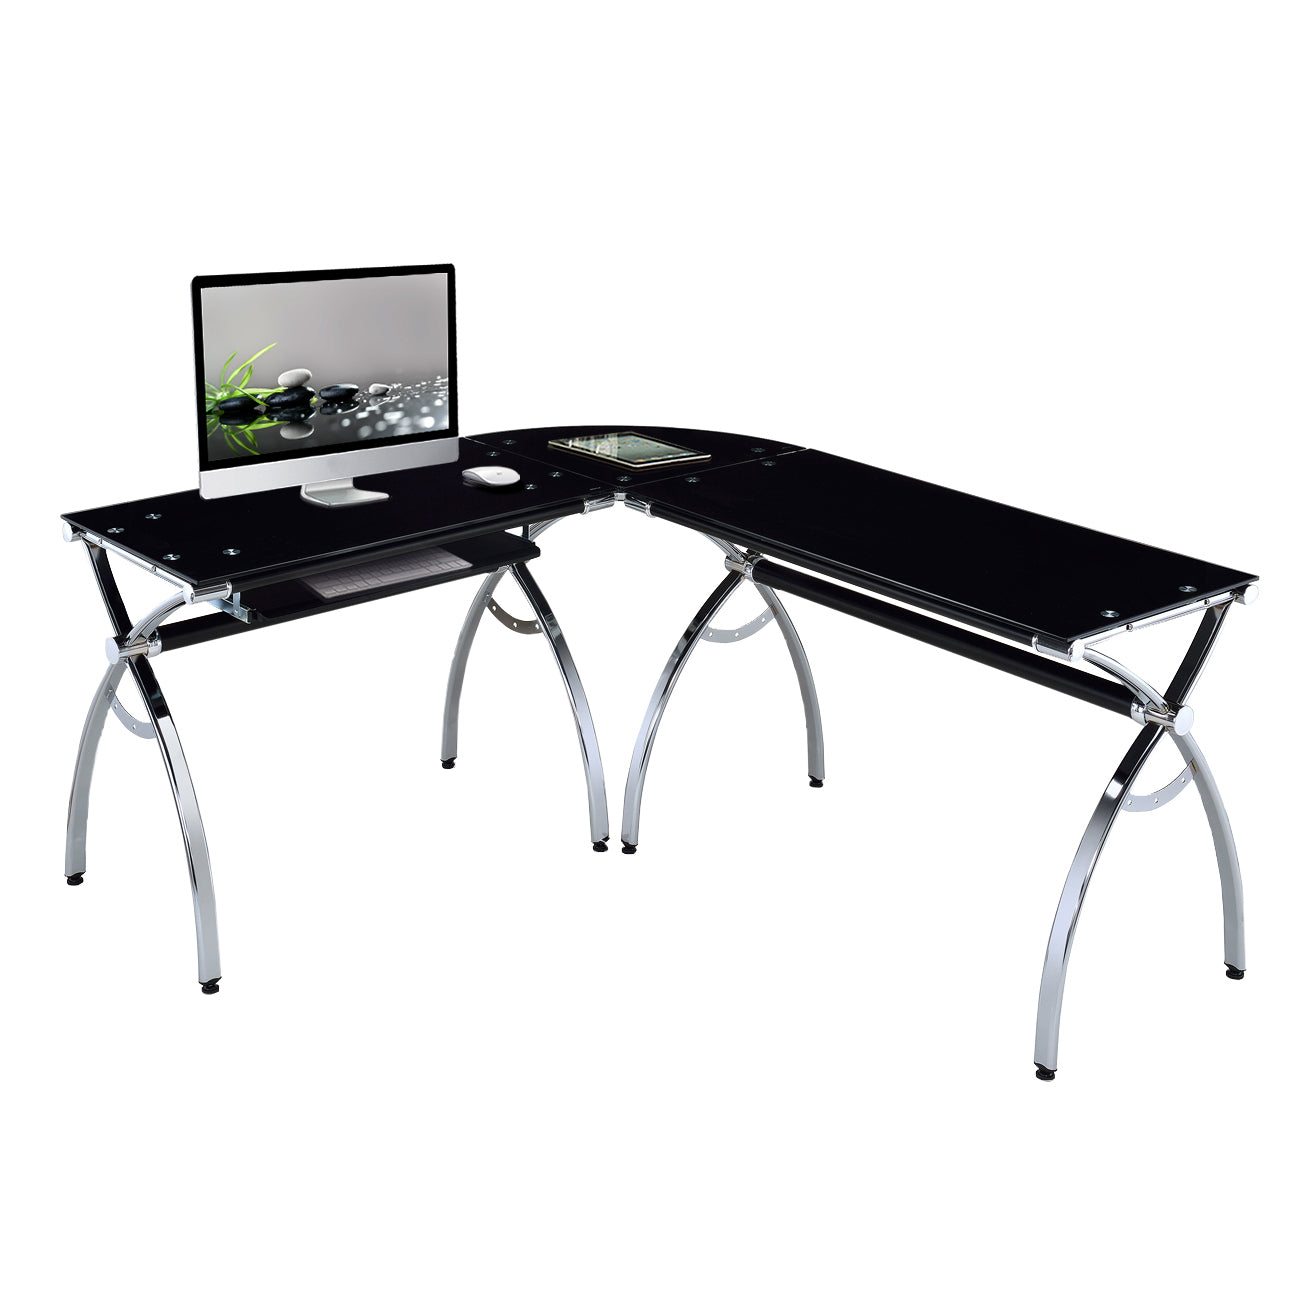 L-Shaped Colored Tempered Glass Top Corner Desk with Pull Out Keyboard Tray (Black)